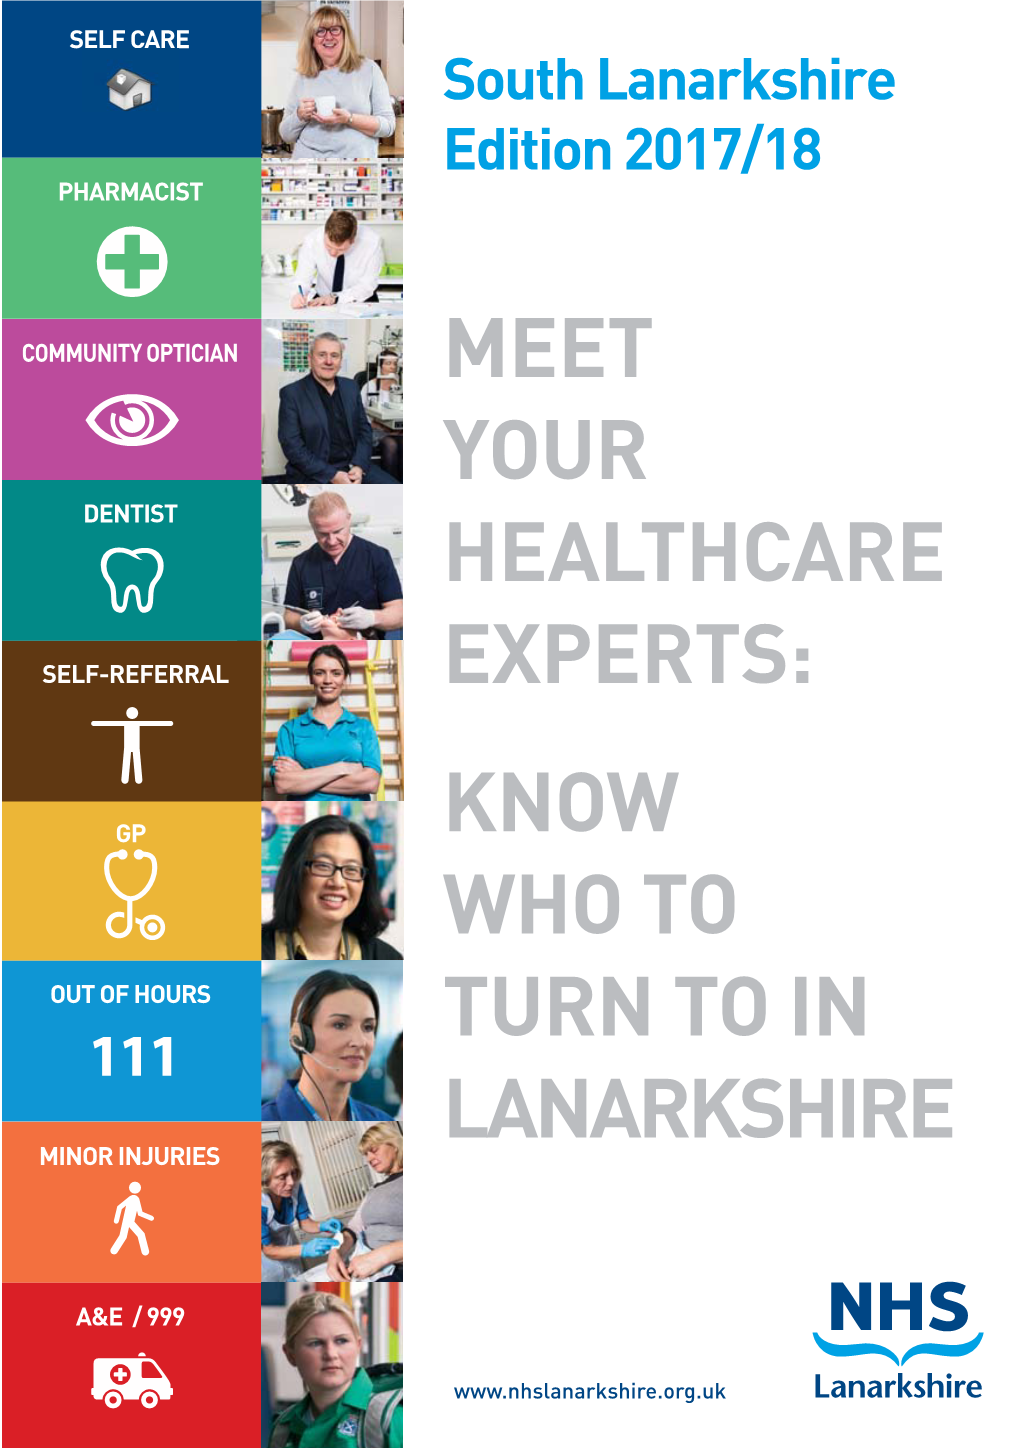 Meet Your Healthcare Experts